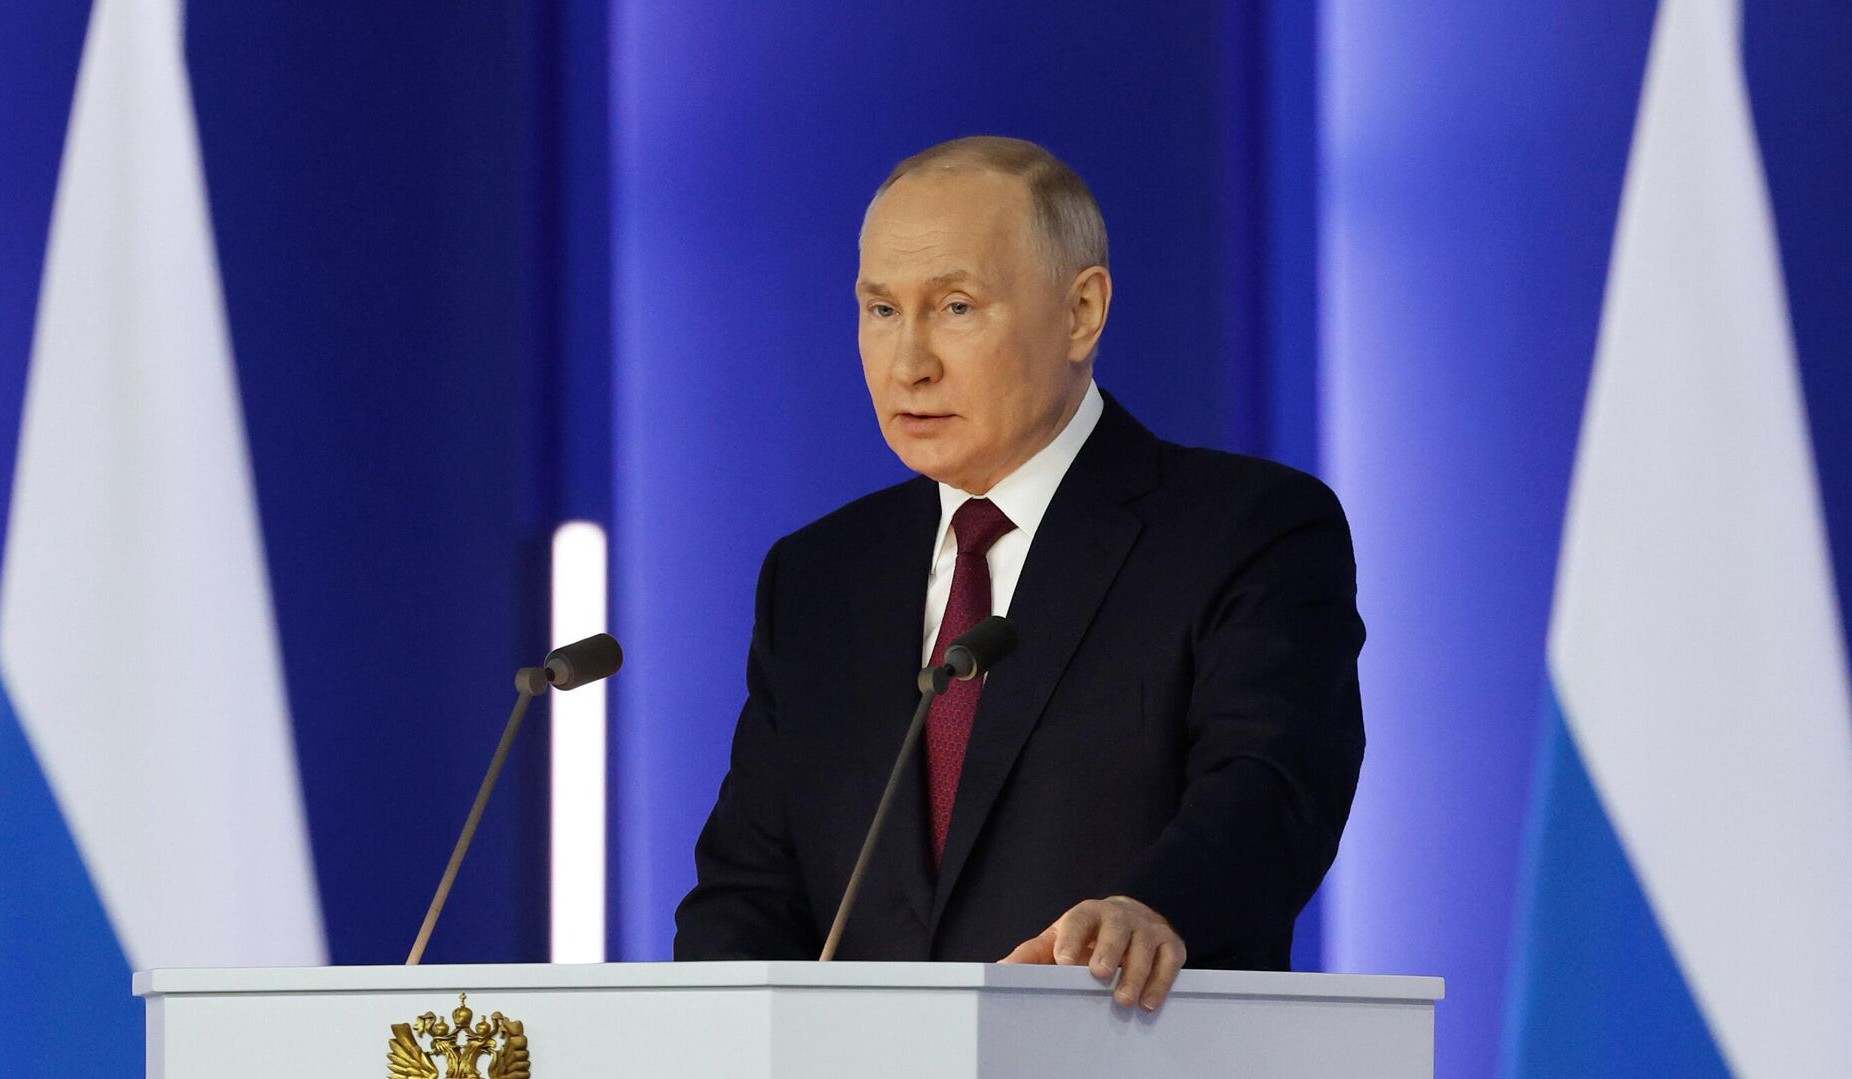 Putin Announces Suspension of New START Treaty, Orders New Strategic Systems Be Put on Combat Duty